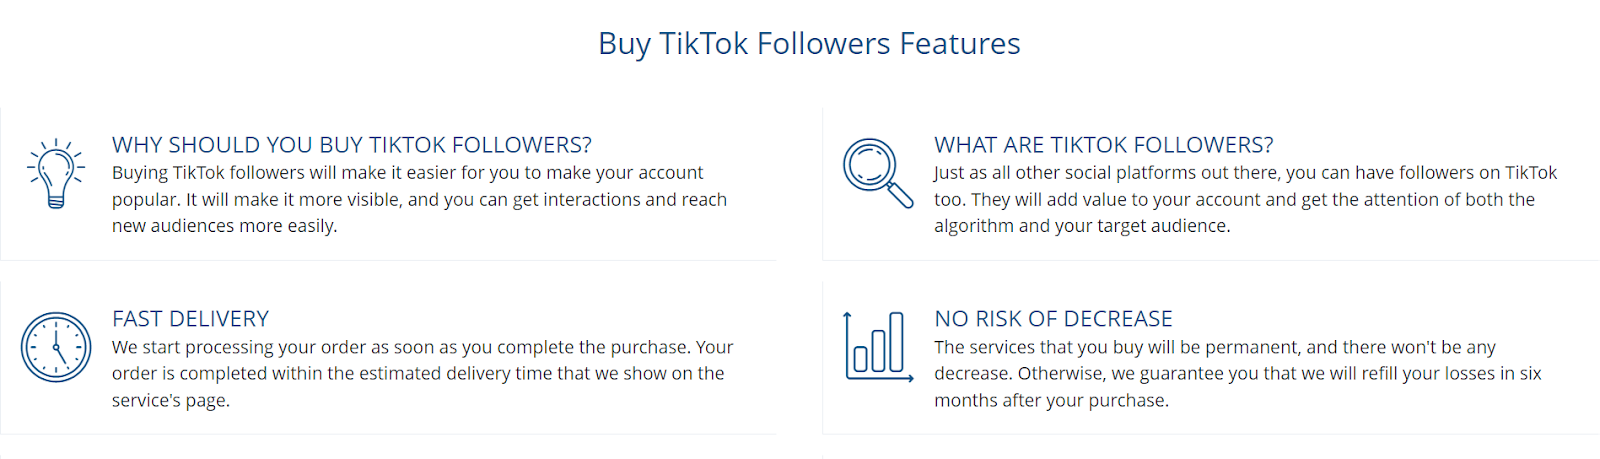 An informative snippet on why to buy TikTok followers highlighting fast delivery and permanent results.